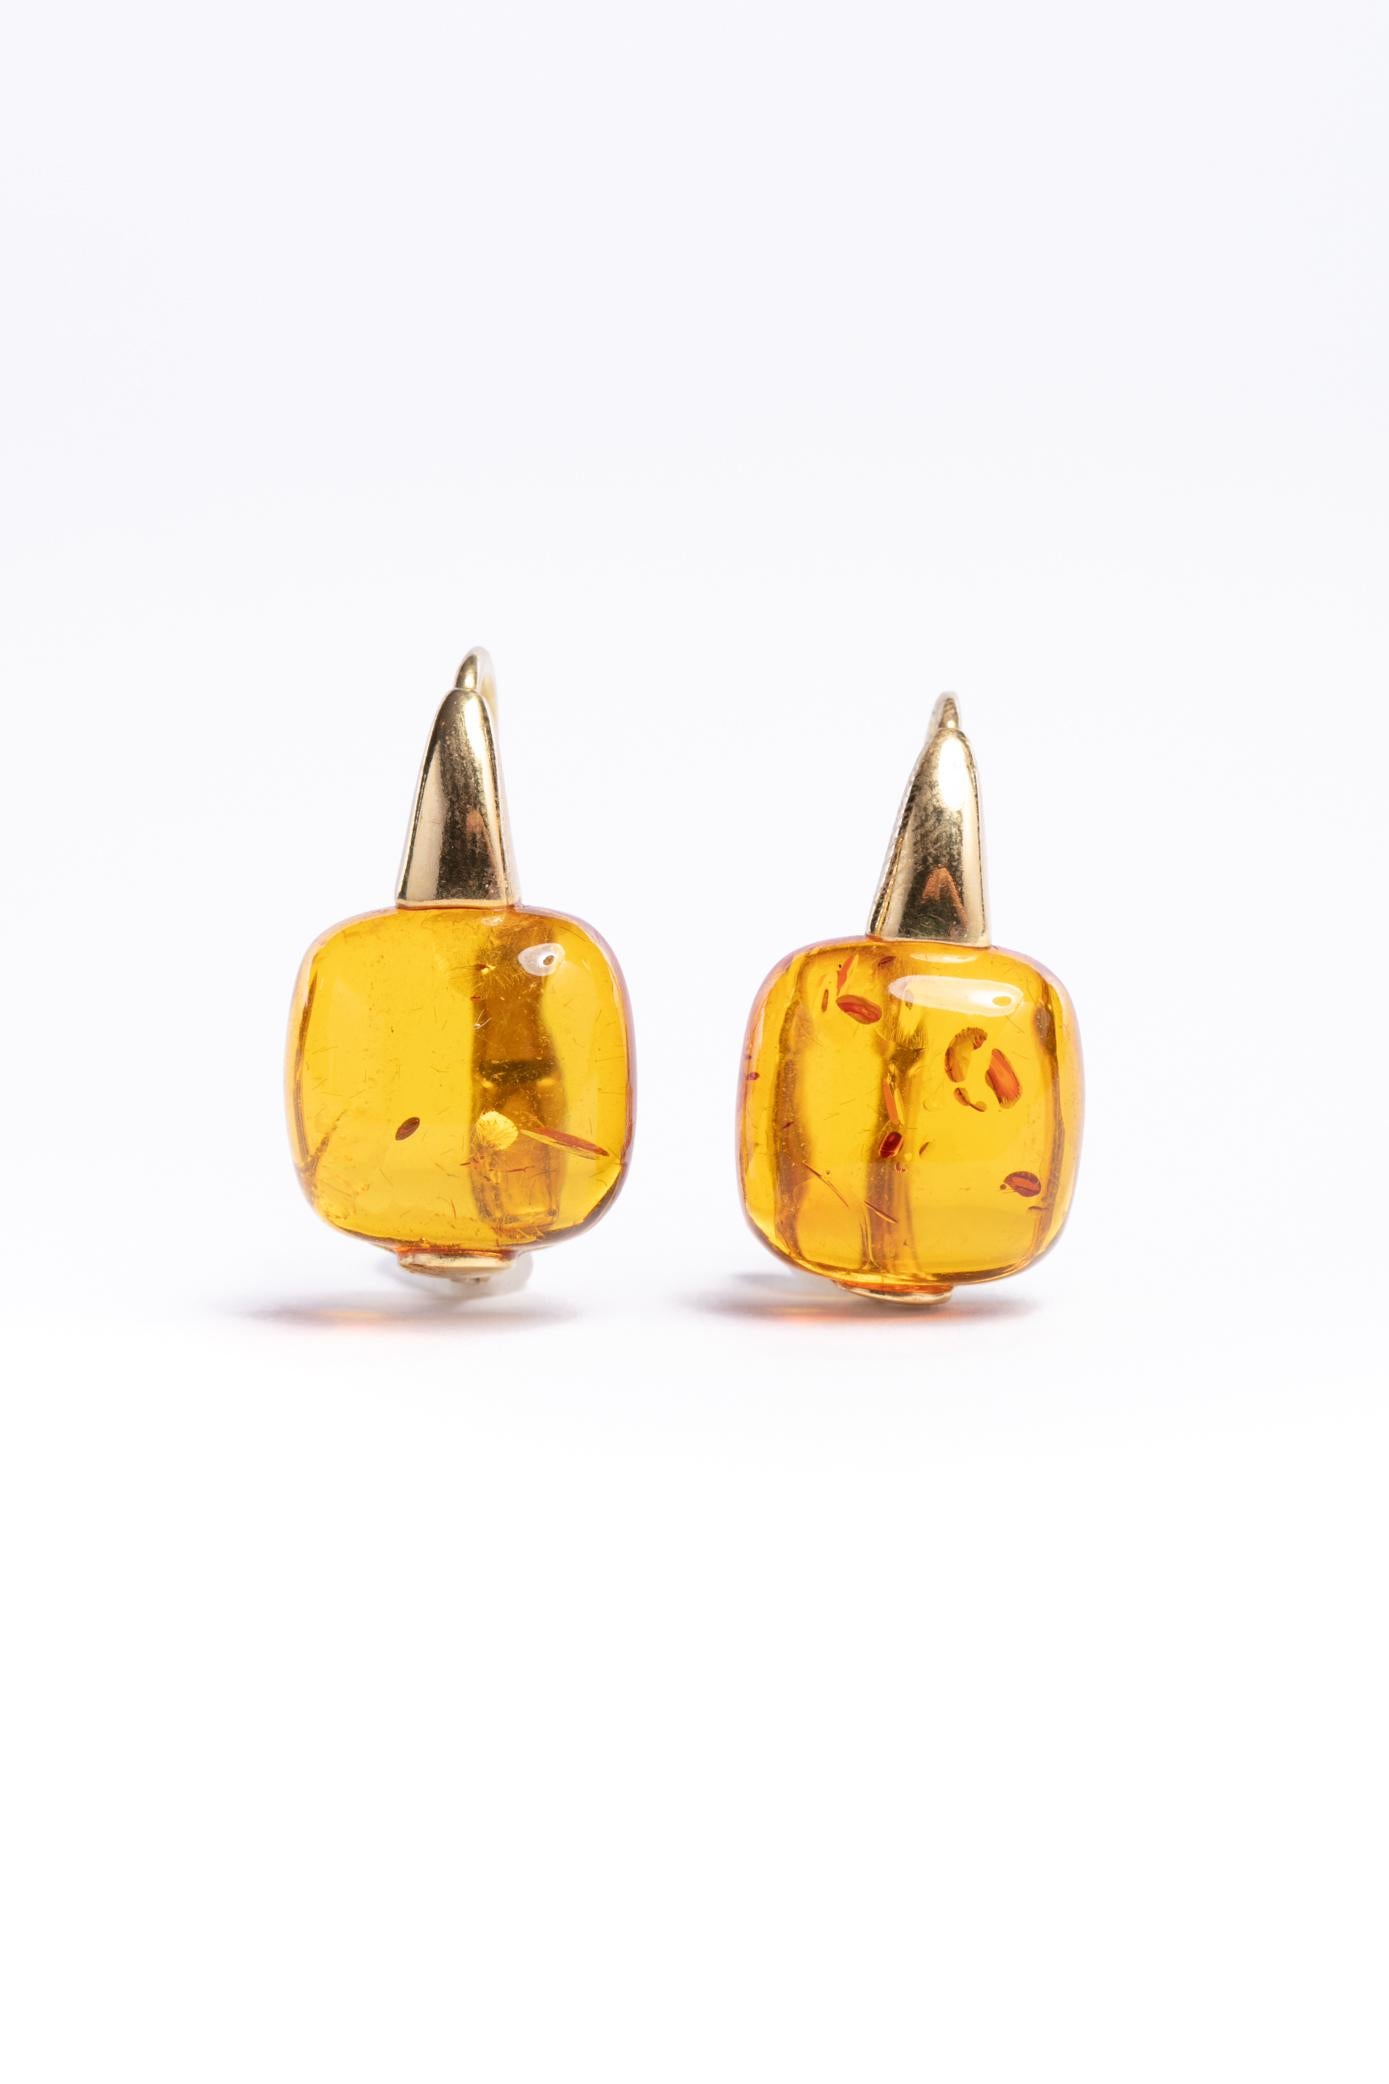 Beautiful yellow gold and amber earrings that look great on everyone.
Great warm color 